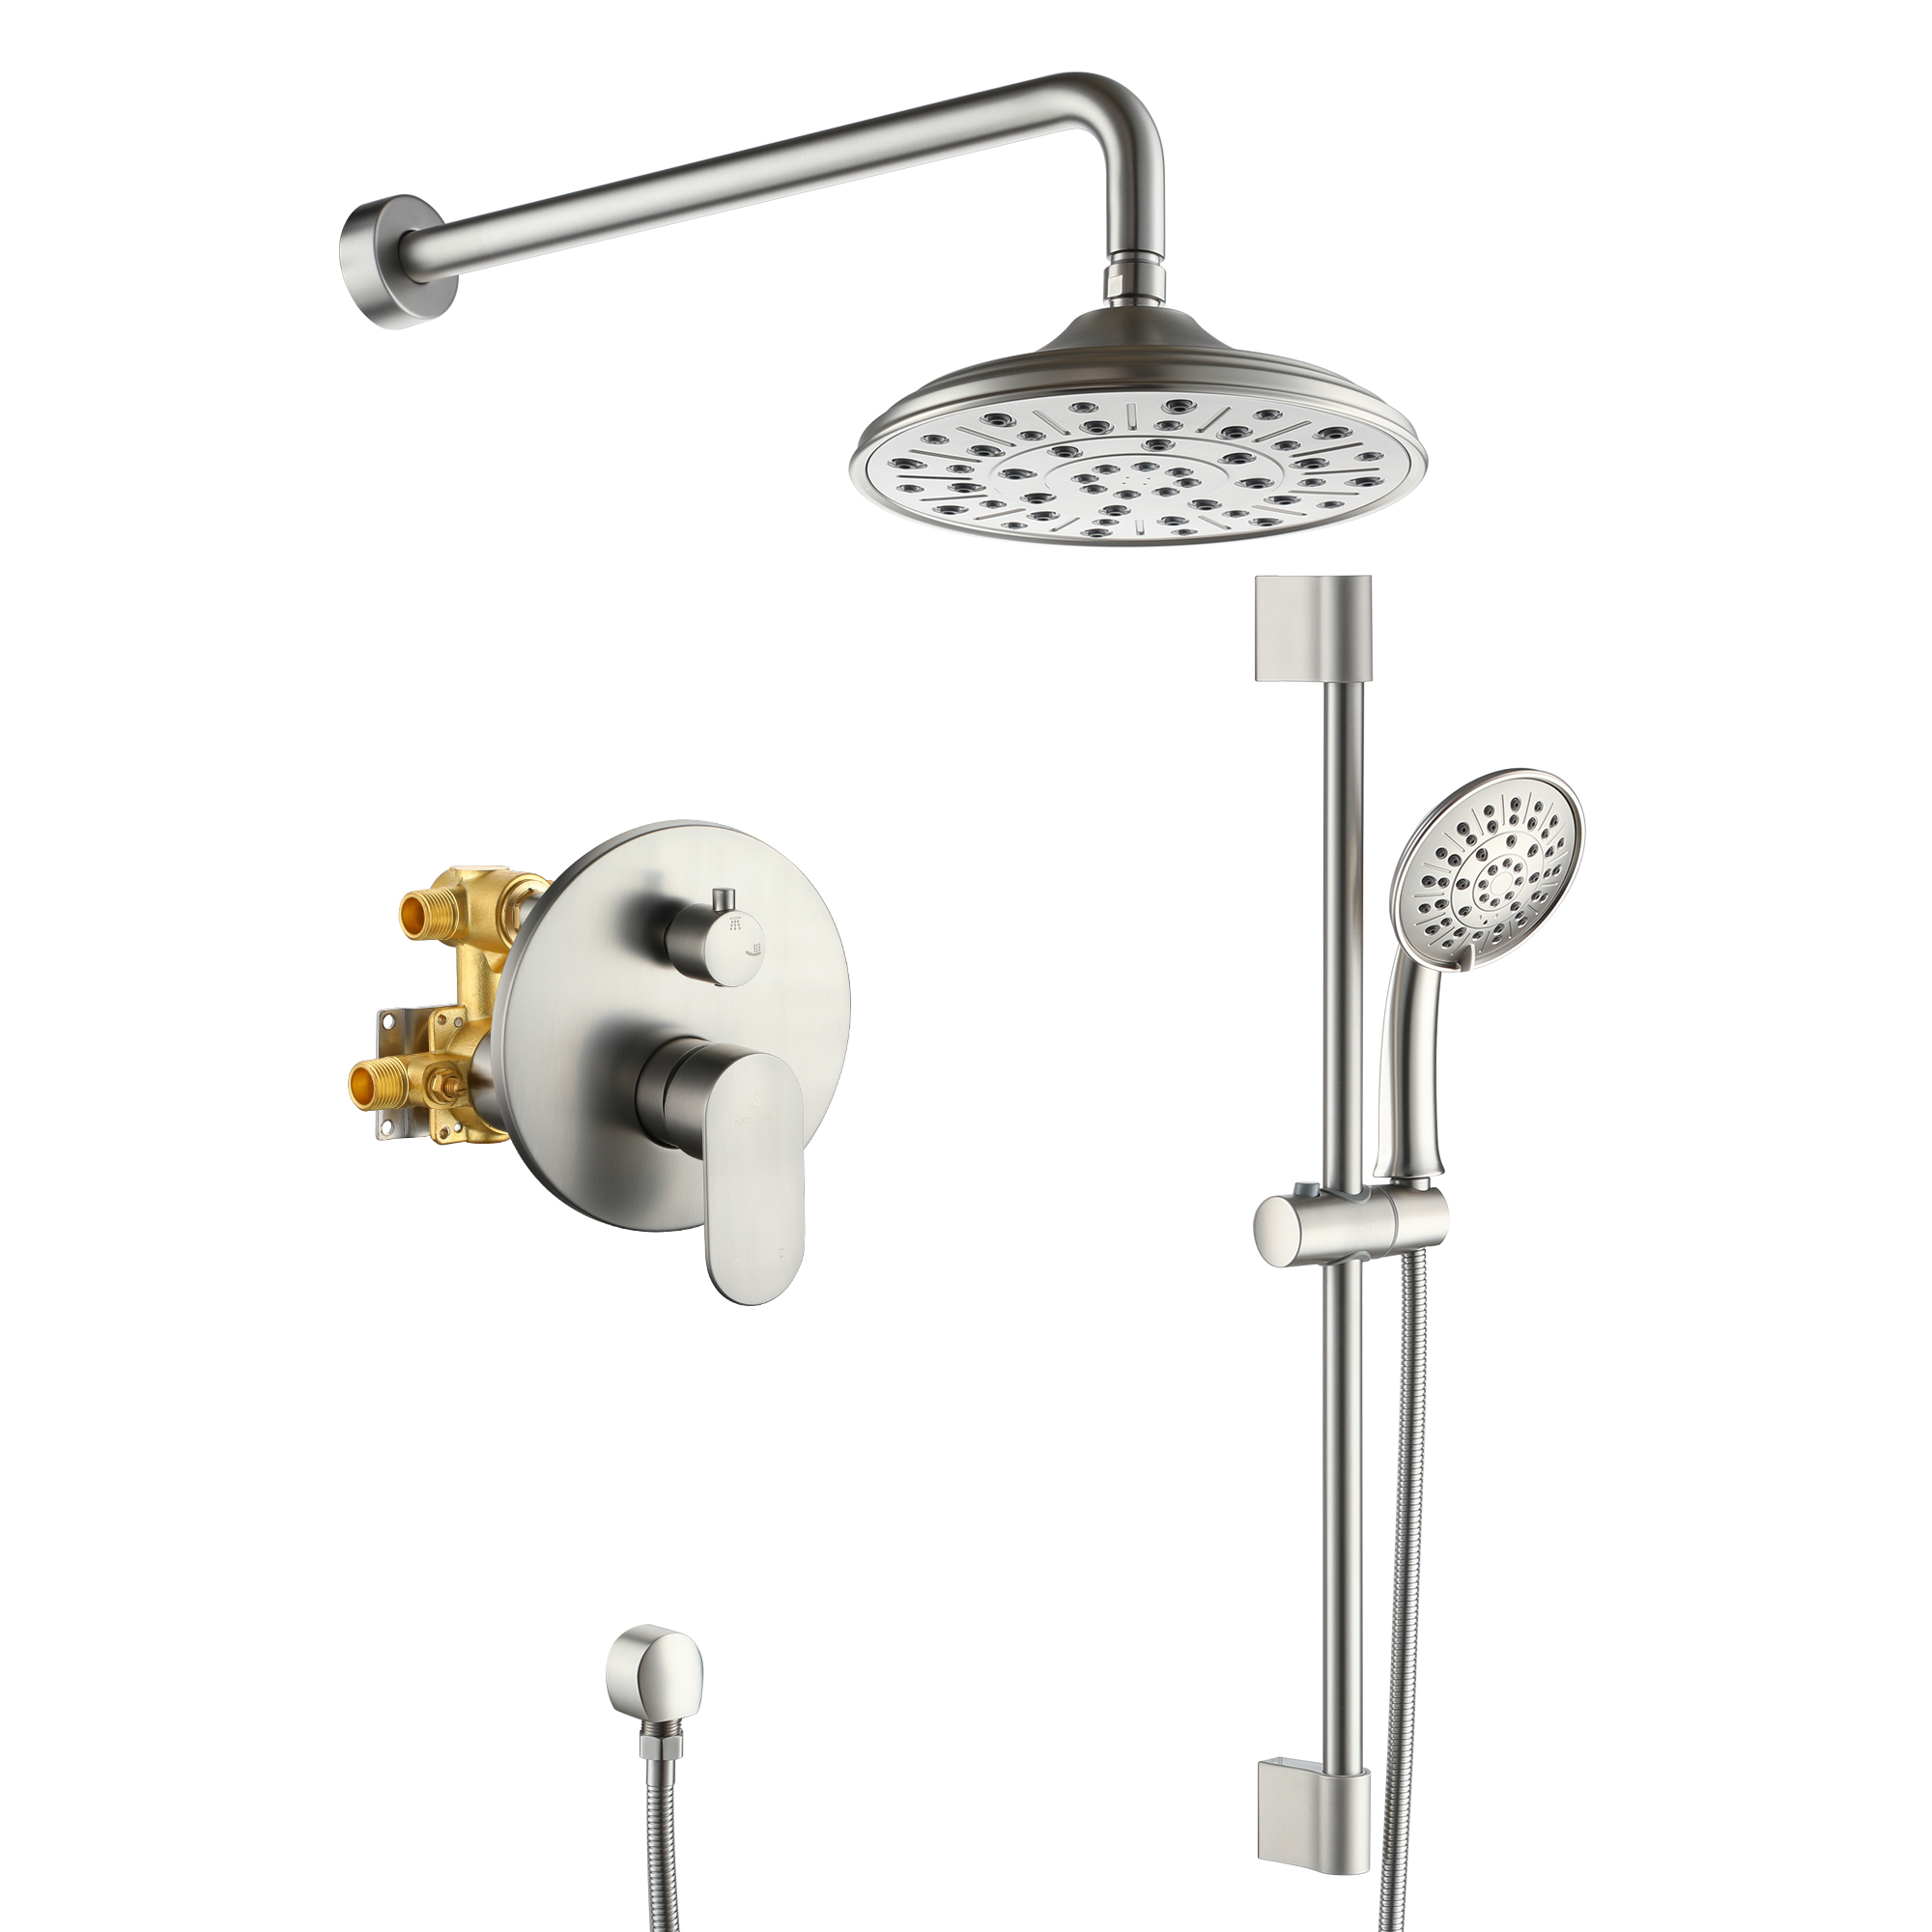 3815-BNMondawe Retro Series 2-Spray Patterns with 1.8 GPM 8 in. Rain Wall Mount Dual Shower Heads with Handheld and Spout in Brushed Nickel/ Black/ Bronze/Brushed Gold-Mondawe